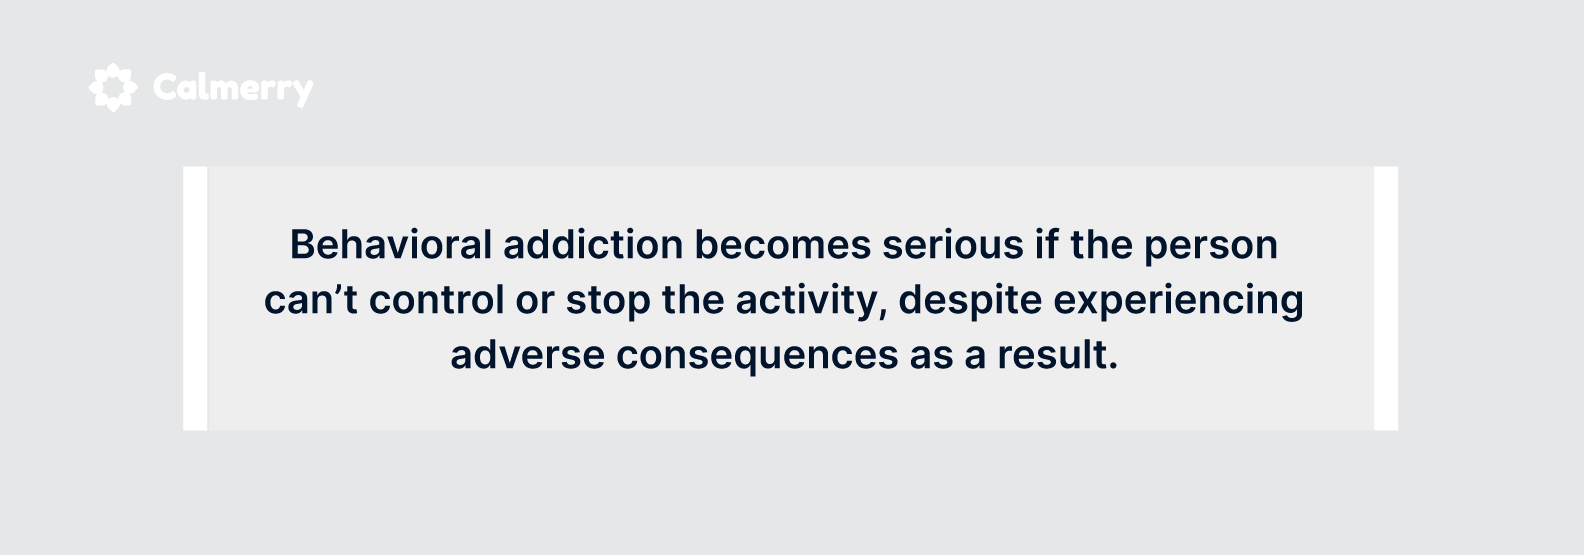 Behavioral addiction becomes serious if the person can’t control or stop the activity